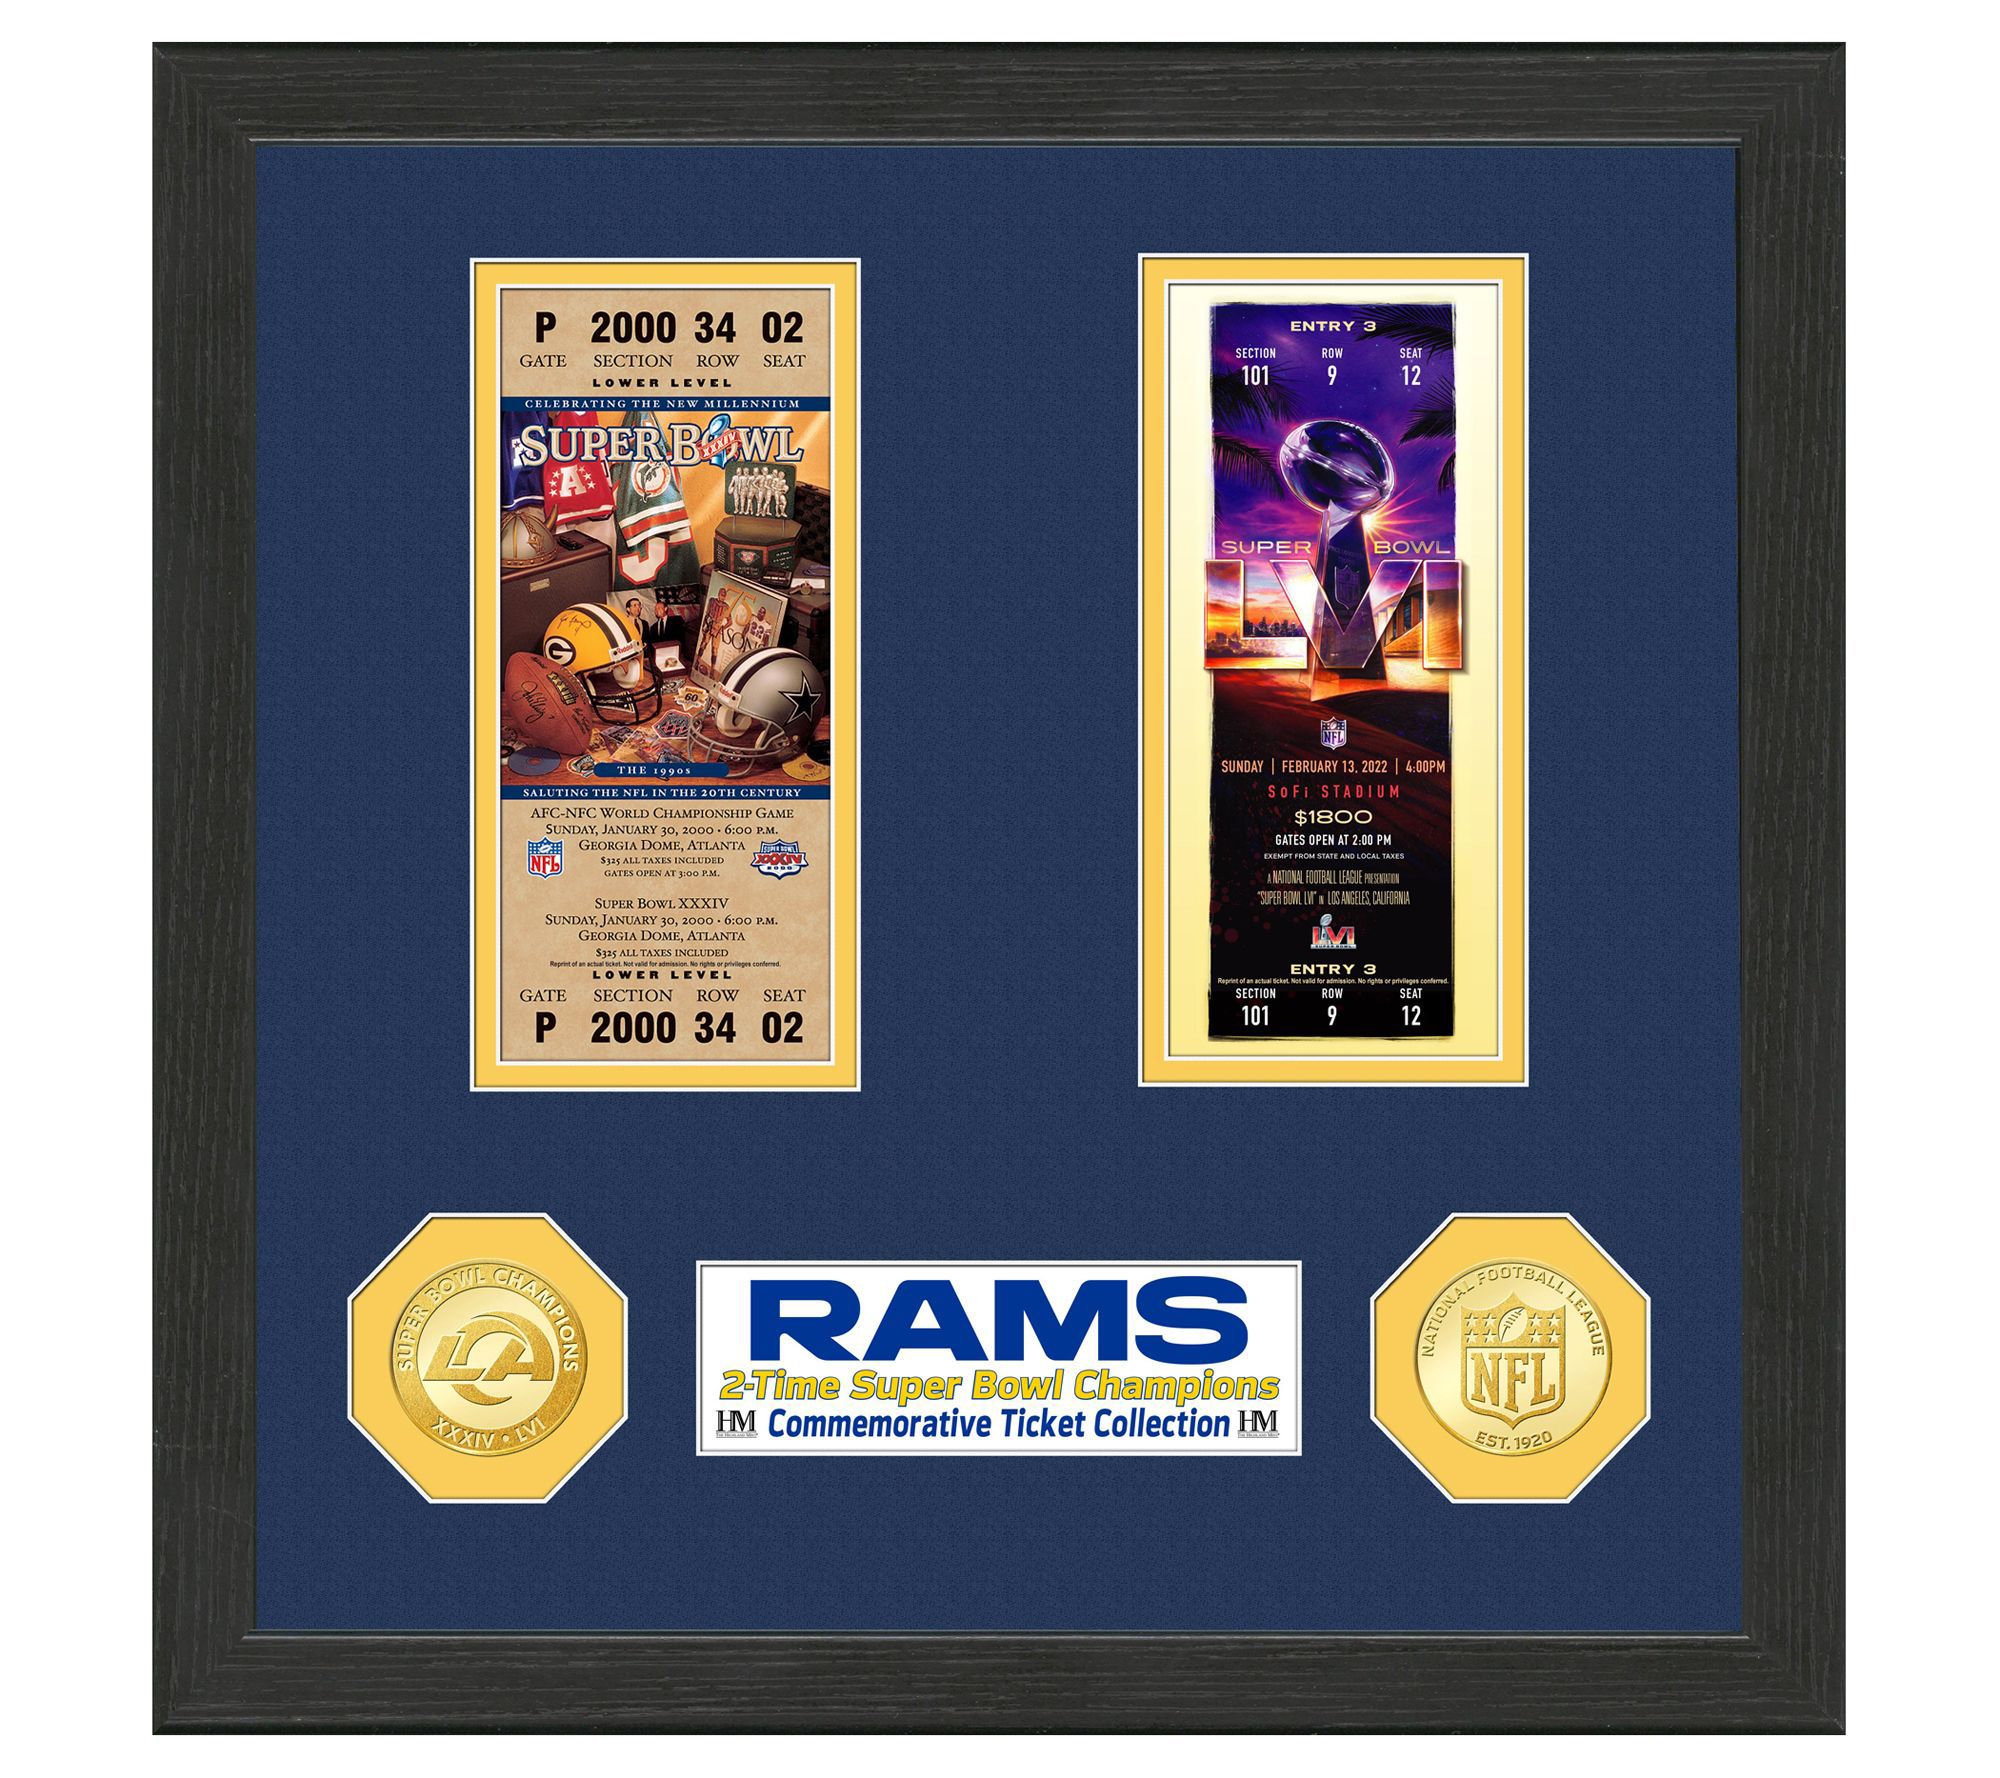 Tampa Bay Buccaneers Road to Super Bowl 55 Ticket Frame, 13x16 